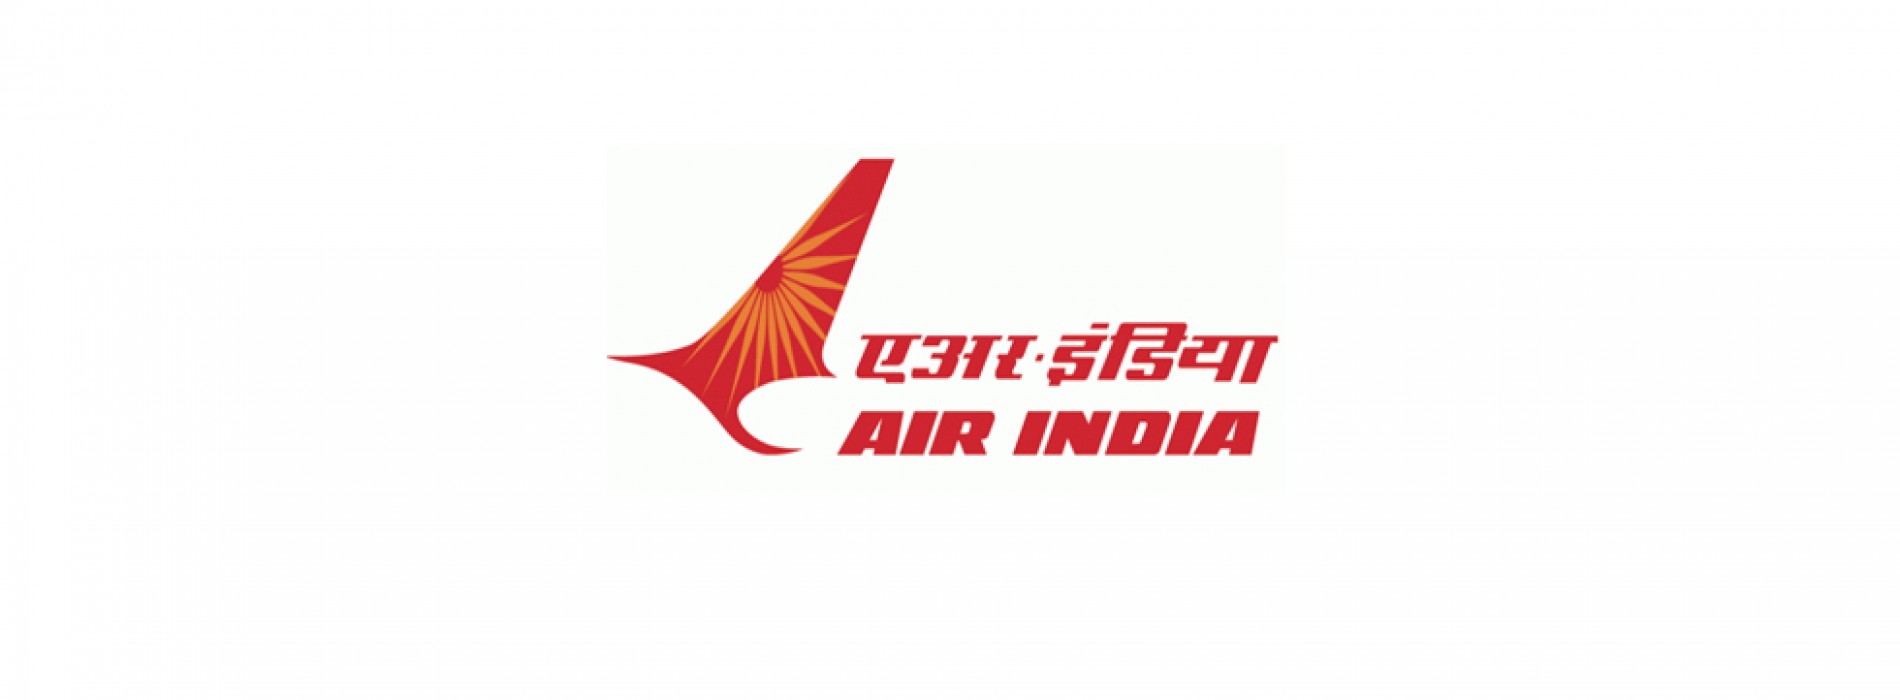 Madrid first of seven new Air India destinations